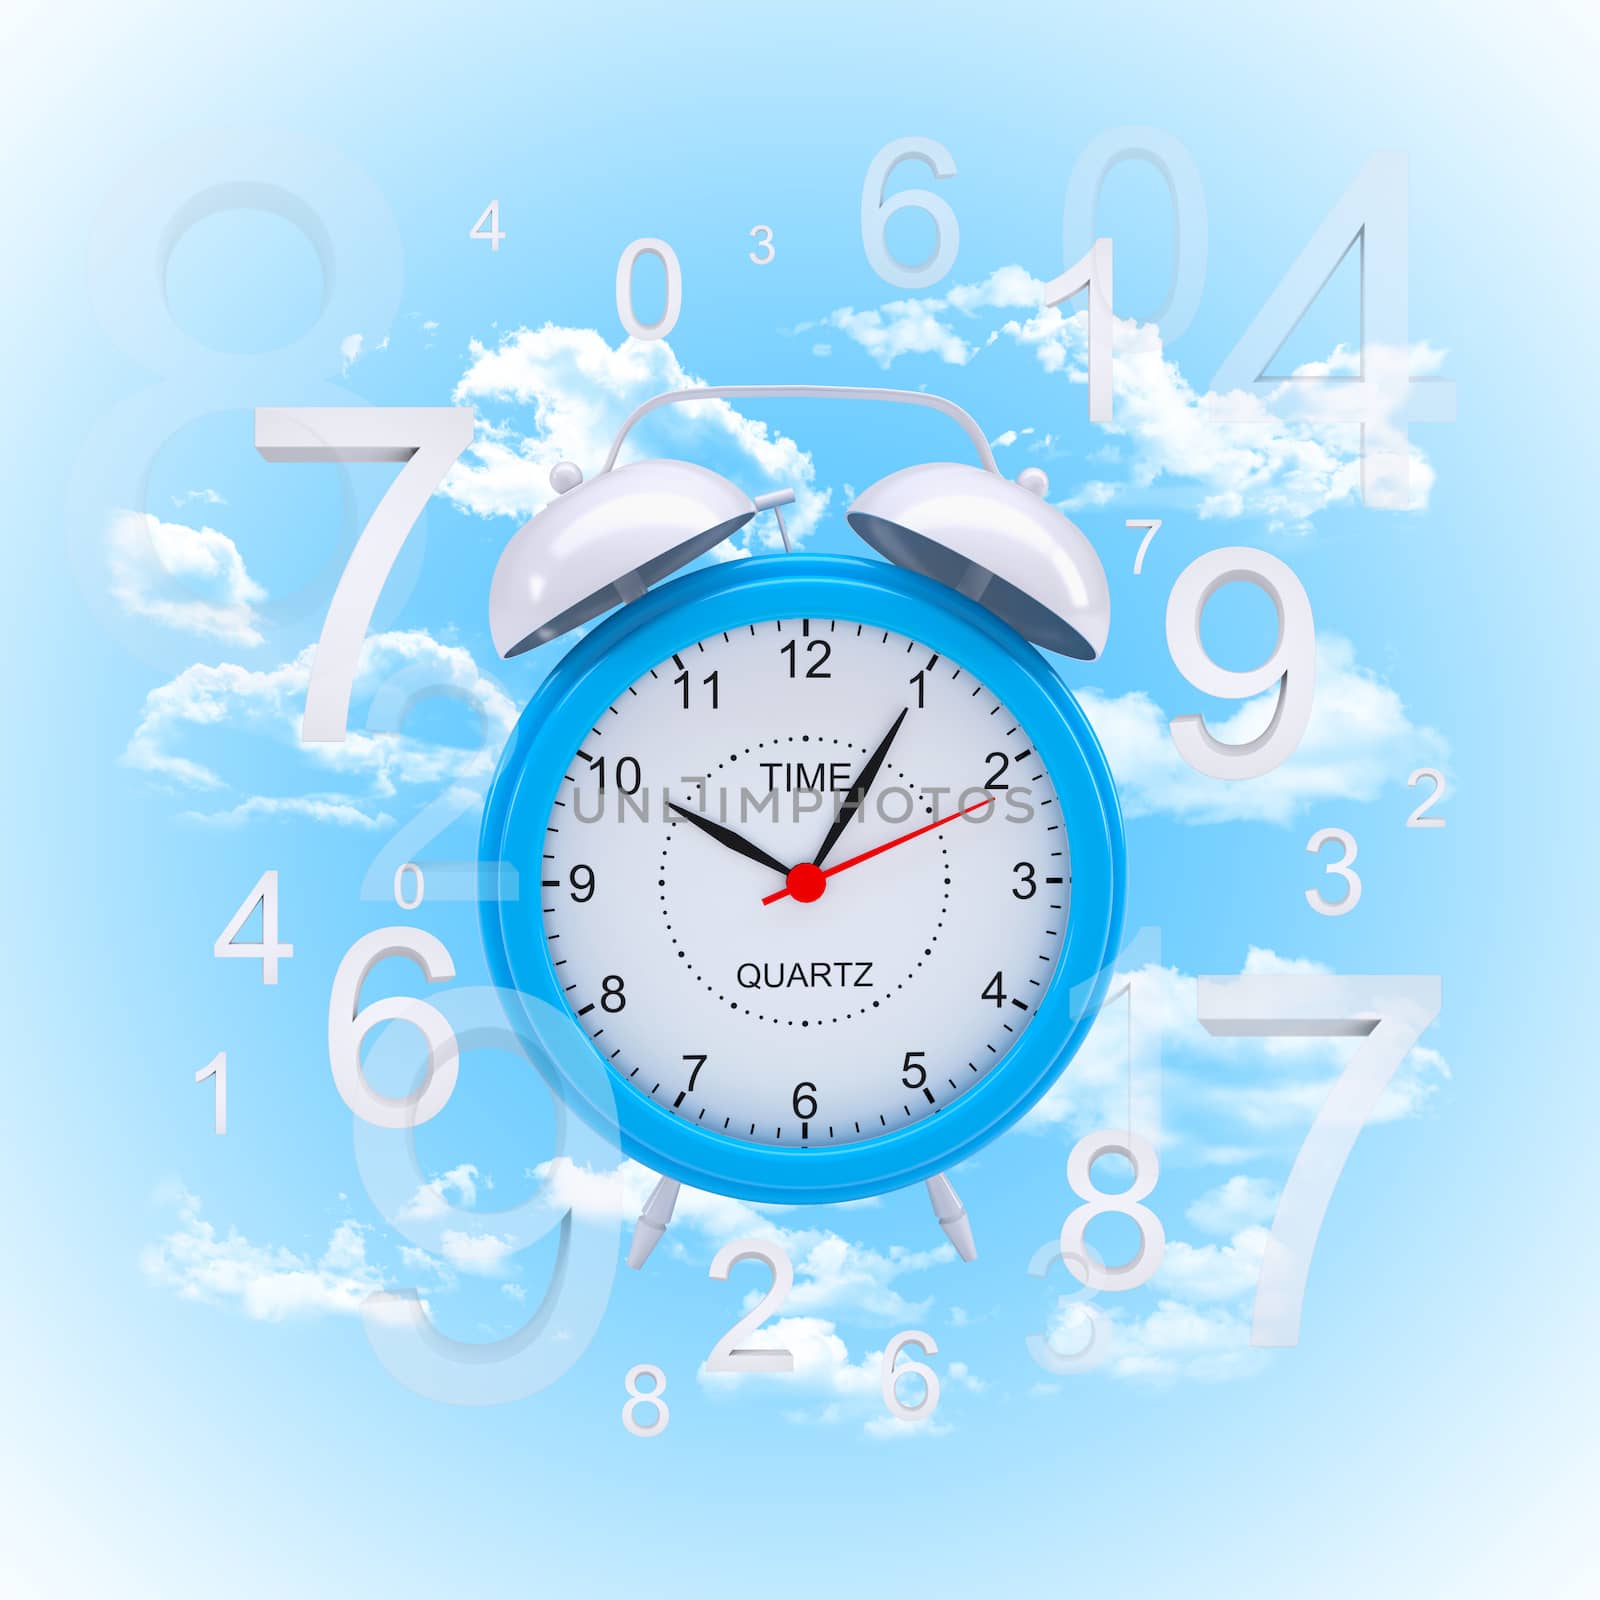 Alarm clock with figures. Sky and clouds as backdrop